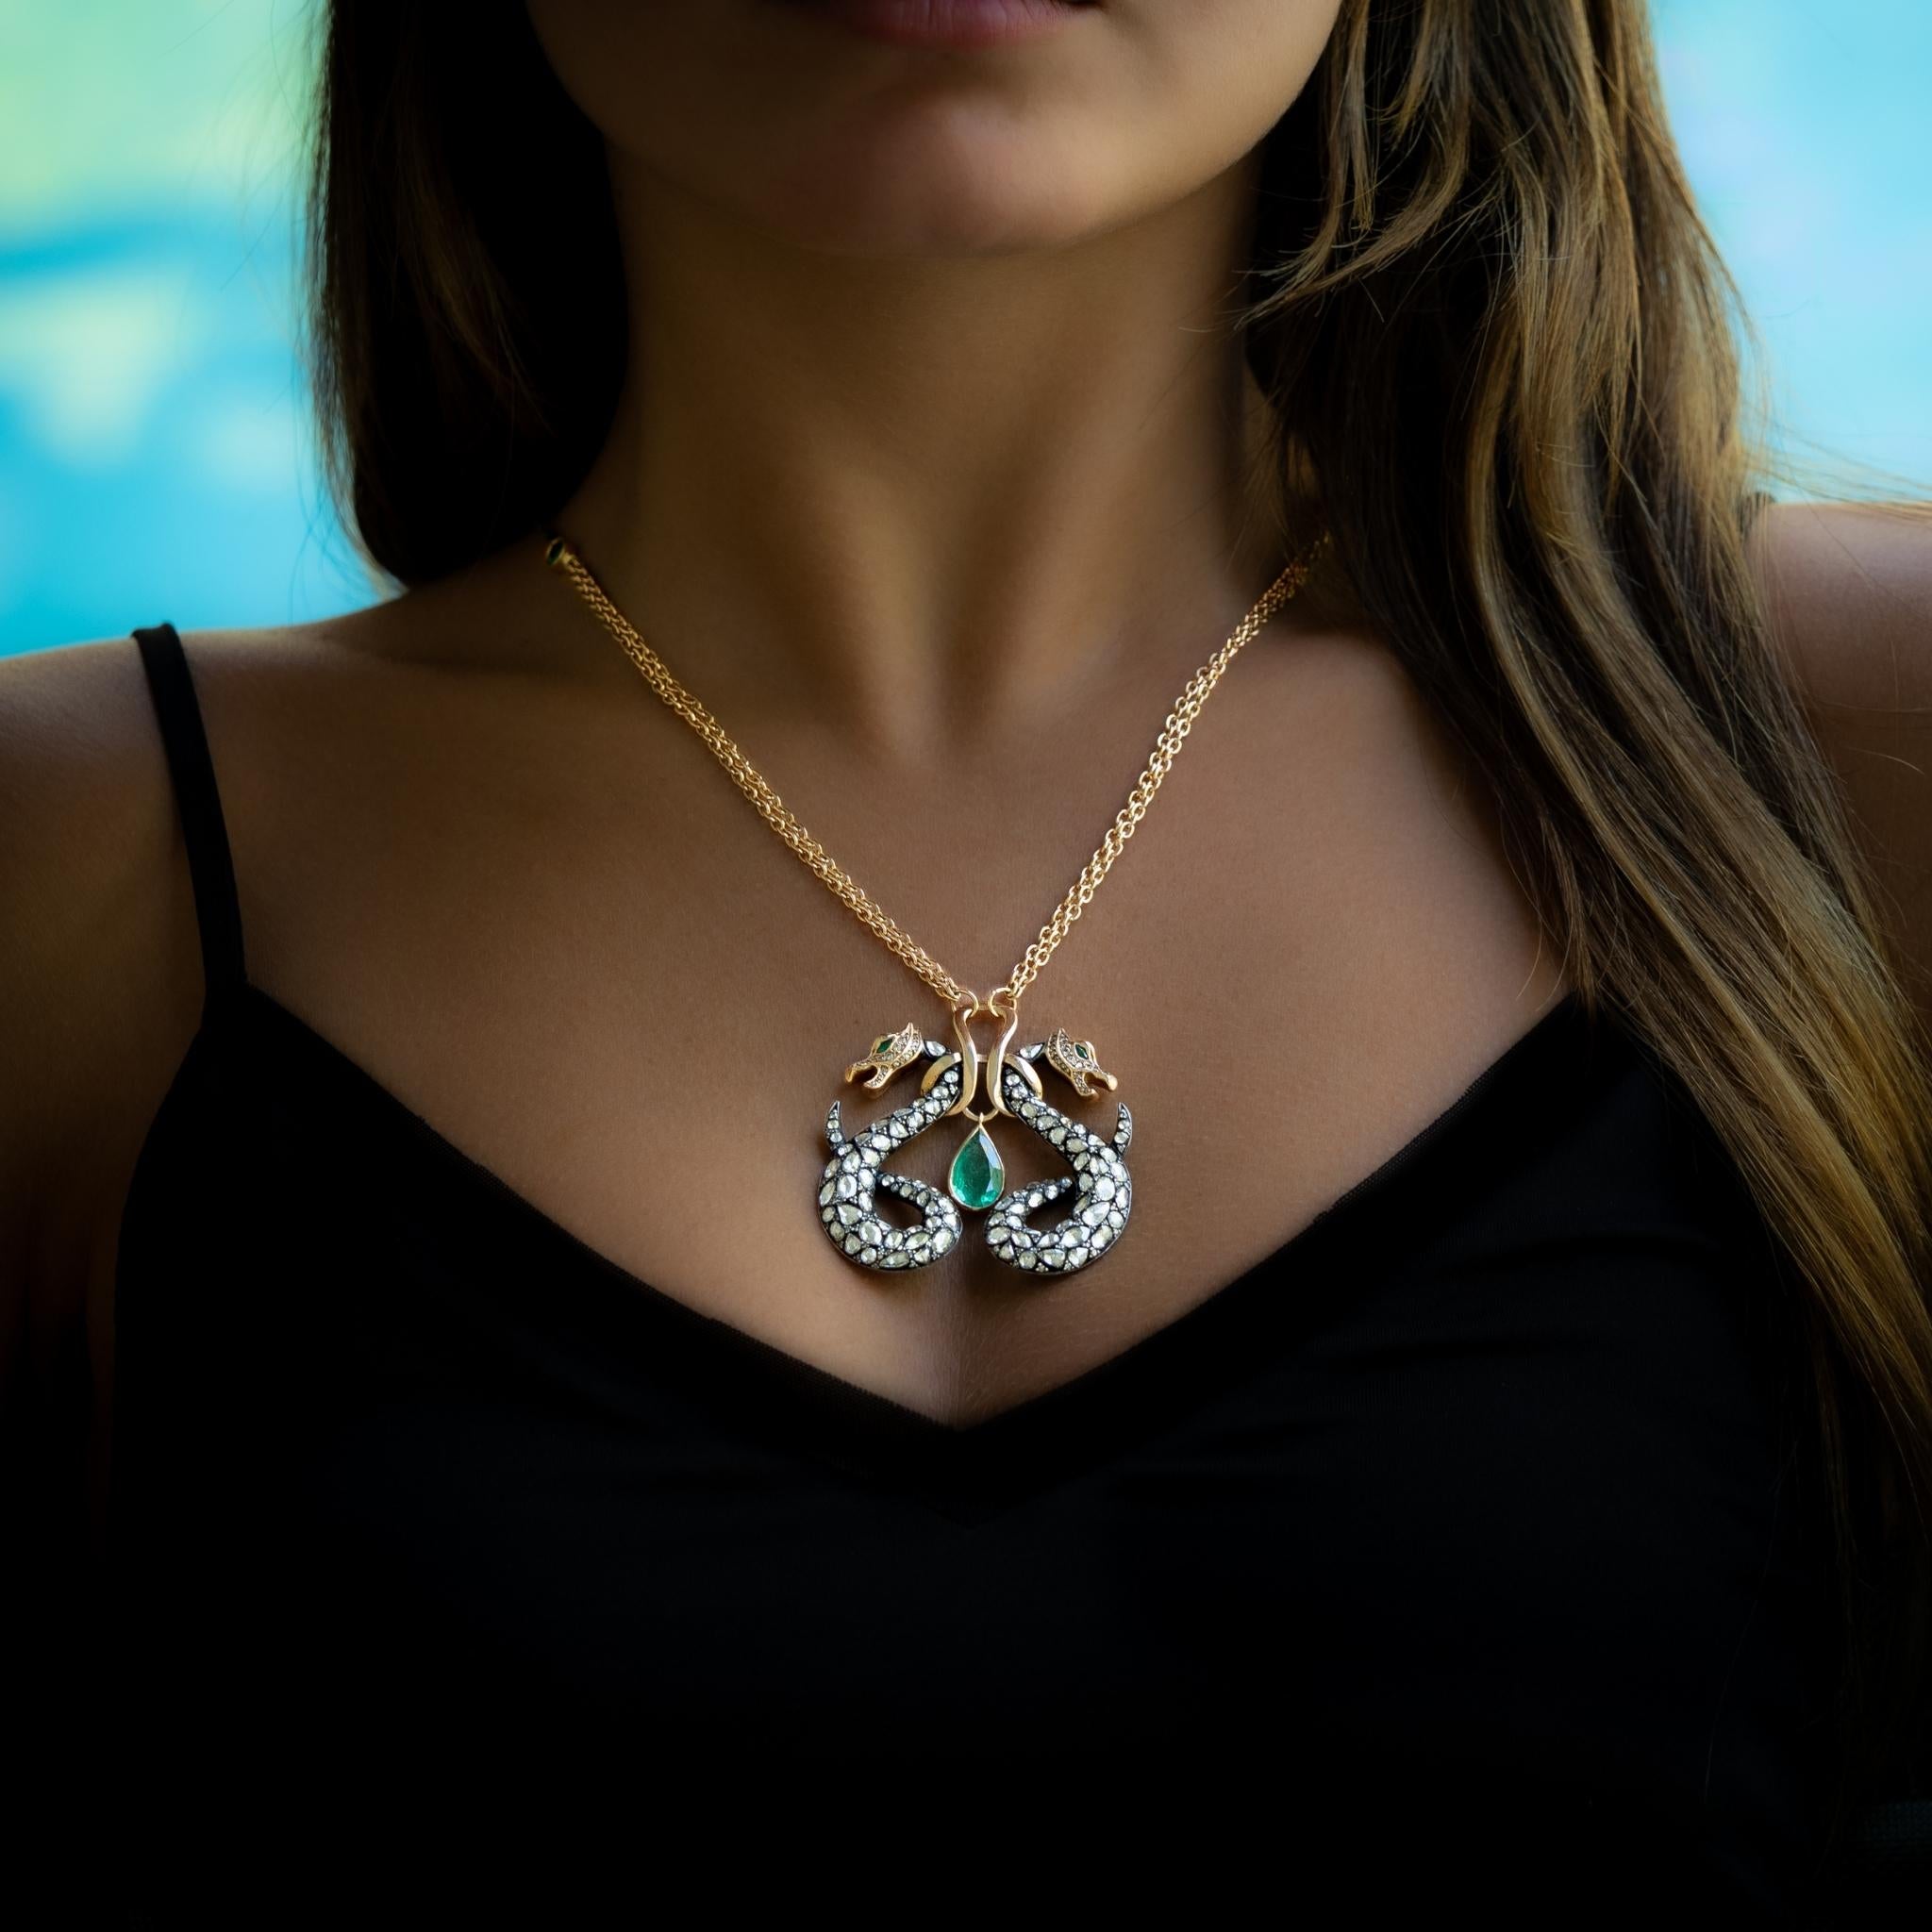 Taru Jewelry Dragon Necklace is an elegant piece crafted from 18K rose gold and sterling silver. Featuring a majestic design of two dragons, it is adorned with sparkling white antique rosecut diamonds and champagne diamonds.